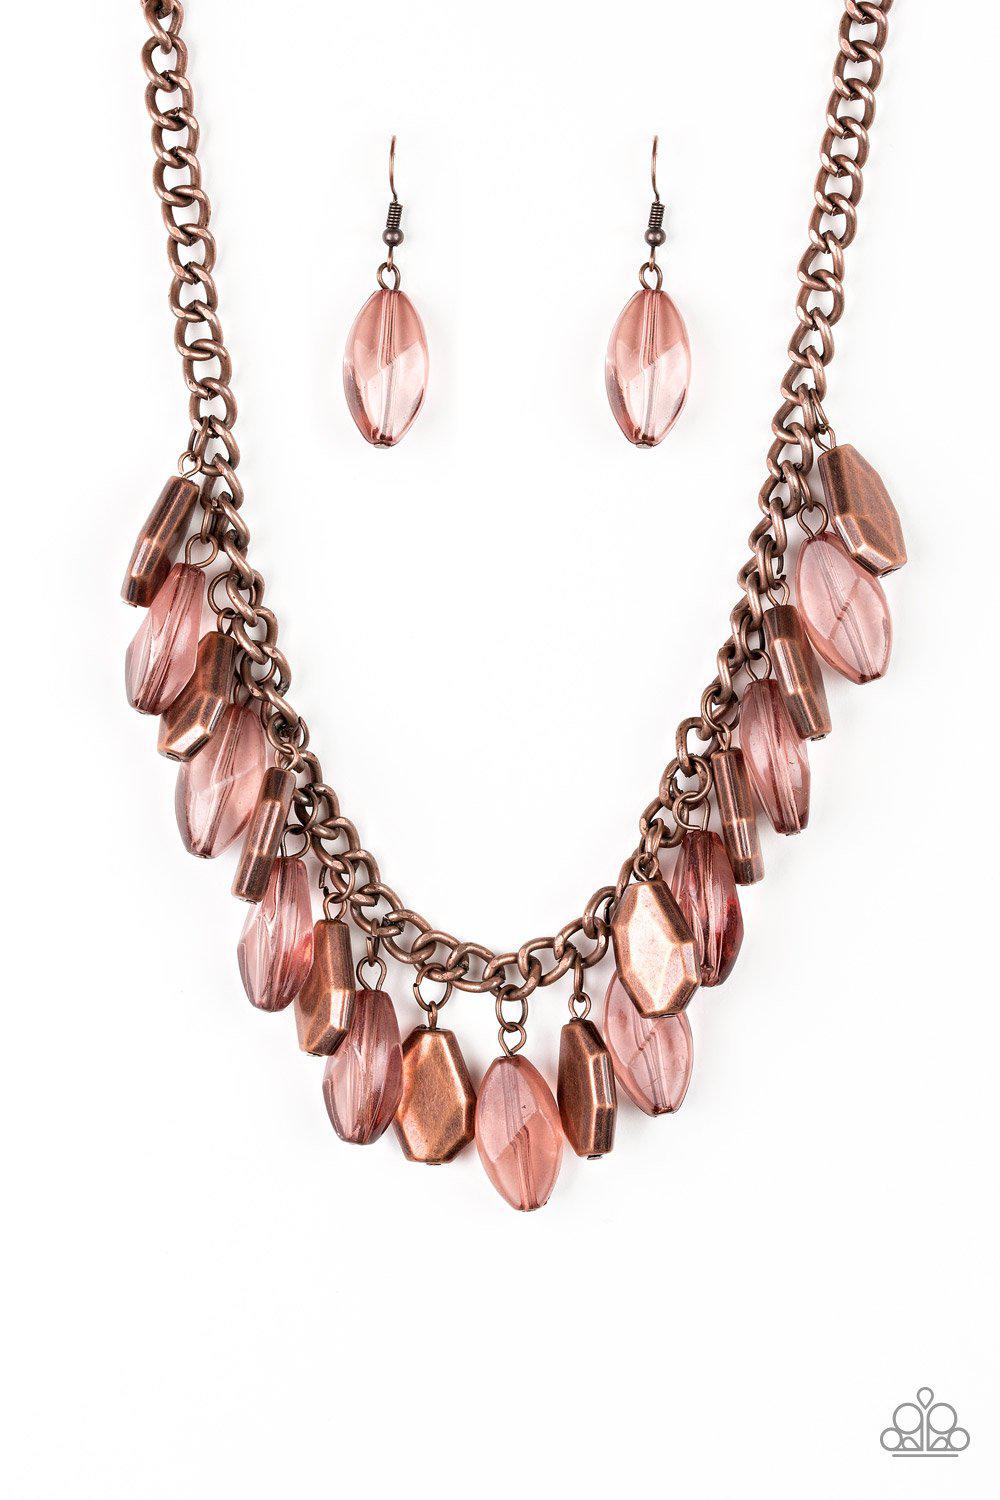 Fringe Fabulous Copper Bead Necklace - Paparazzi Accessories-CarasShop.com - $5 Jewelry by Cara Jewels